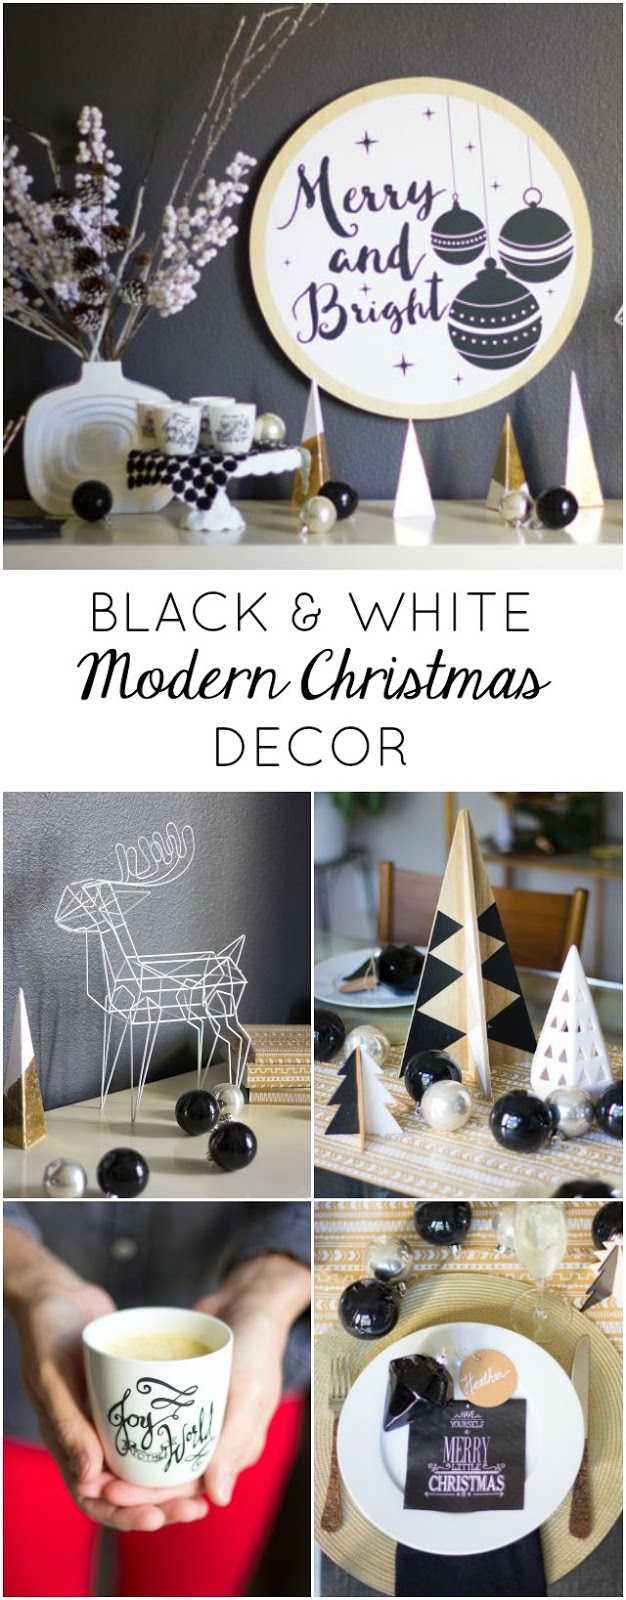 Try a neutral black & white palette for your Christmas decor this season!